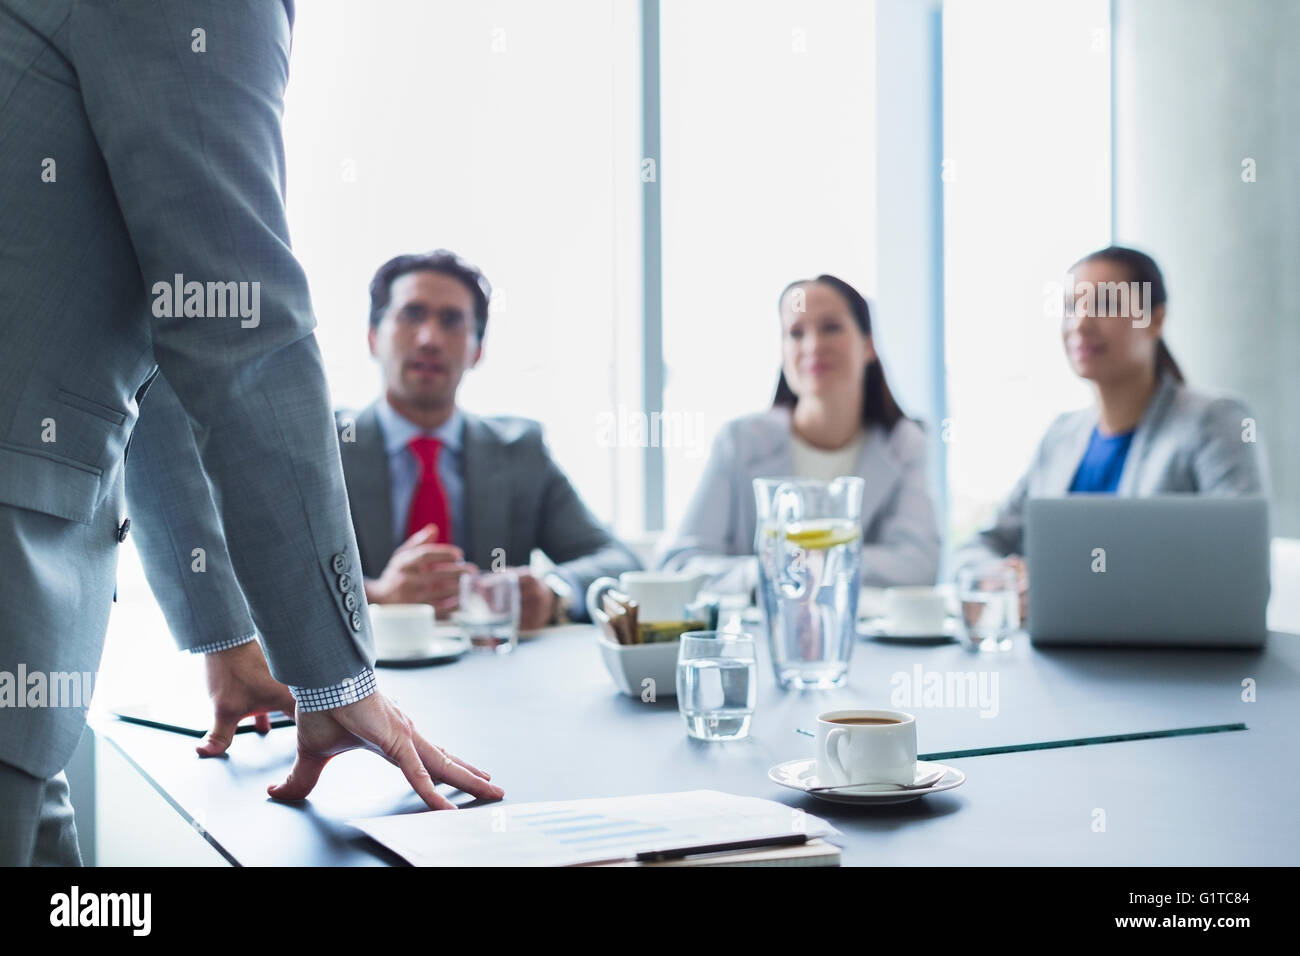 Businessman leading meeting in conference room Stock Photo